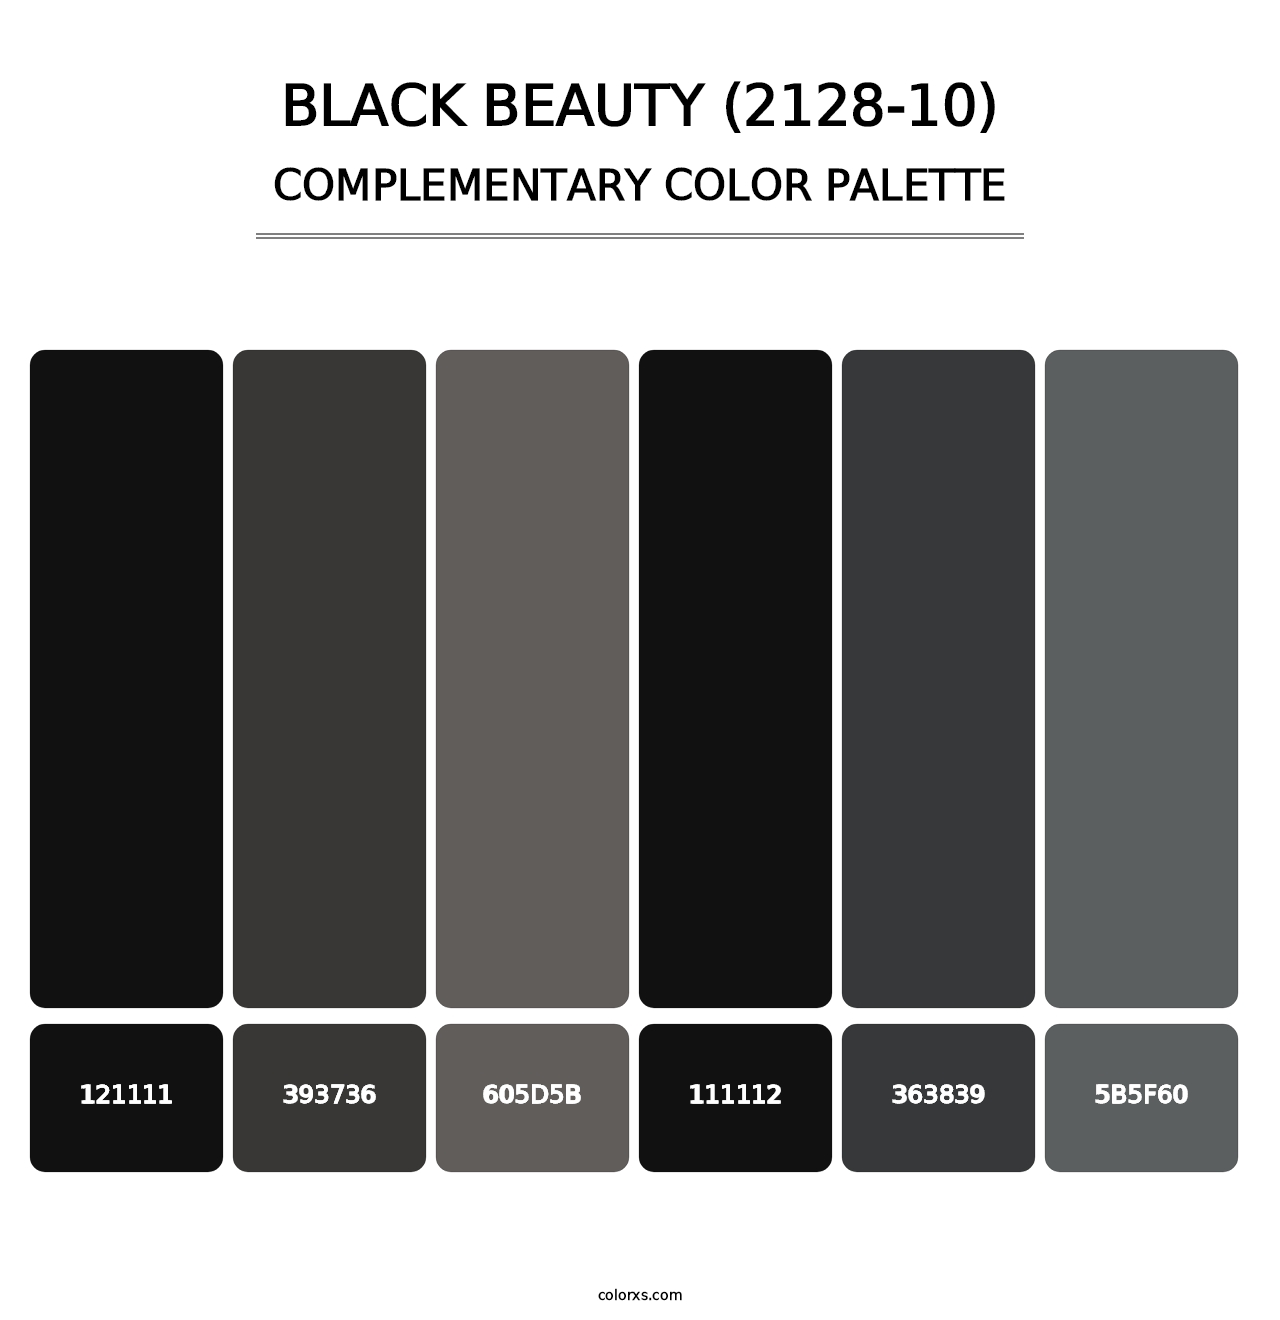 Black Beauty (2128-10) - Complementary Color Palette